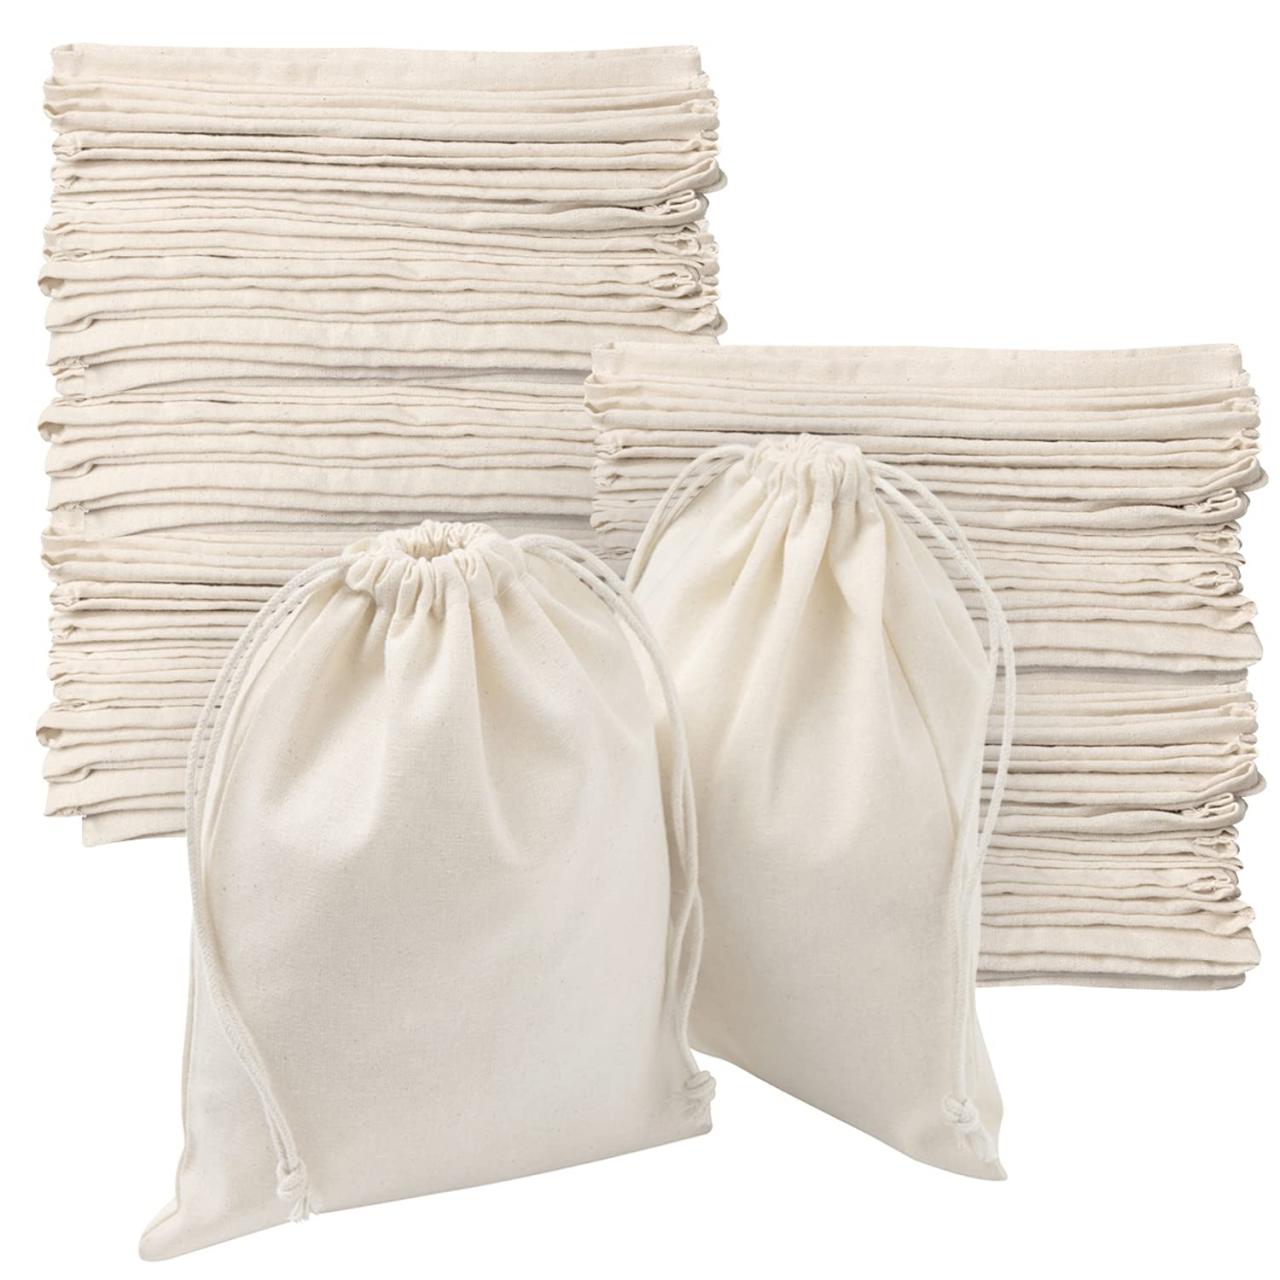 Affordable Drawstring Bags Wholesale: Buy in Bulk and Save Big